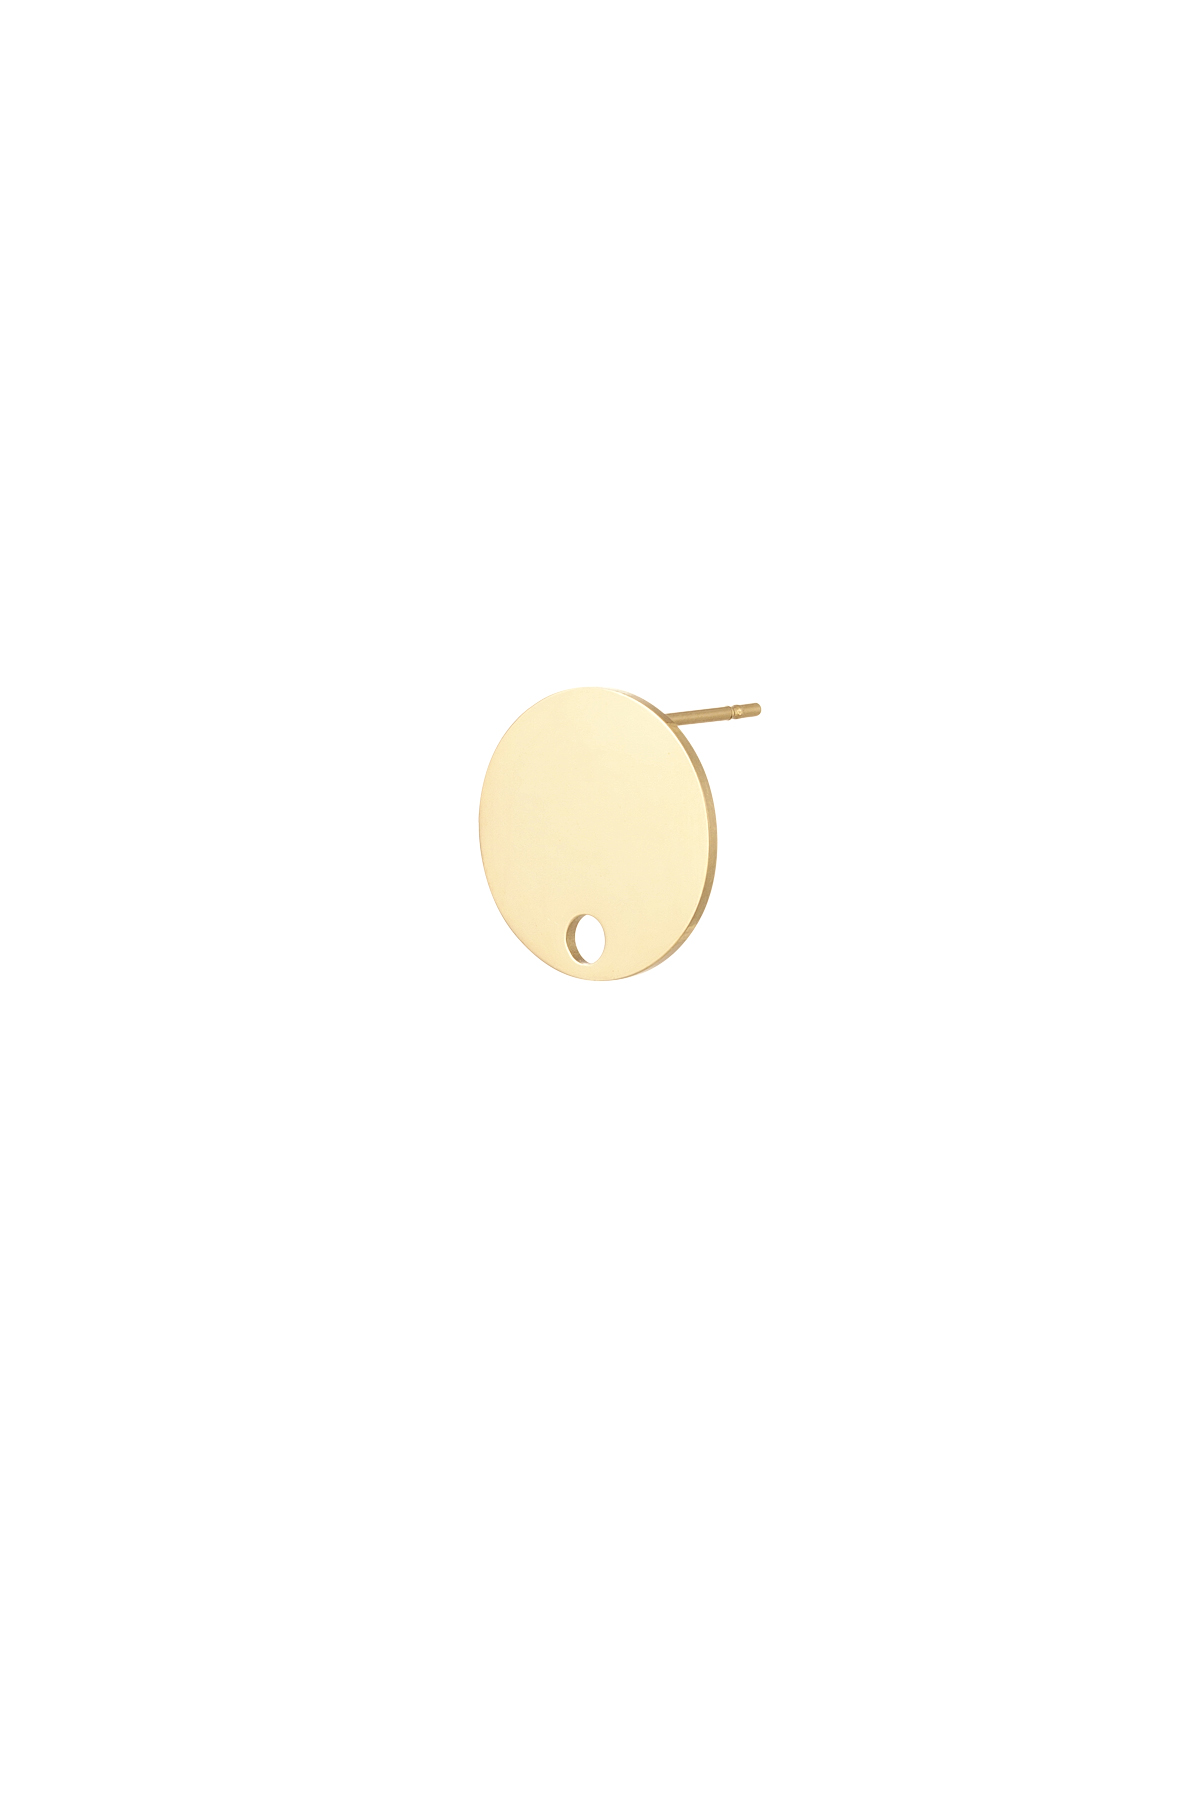 Ear stud part round - gold Stainless Steel